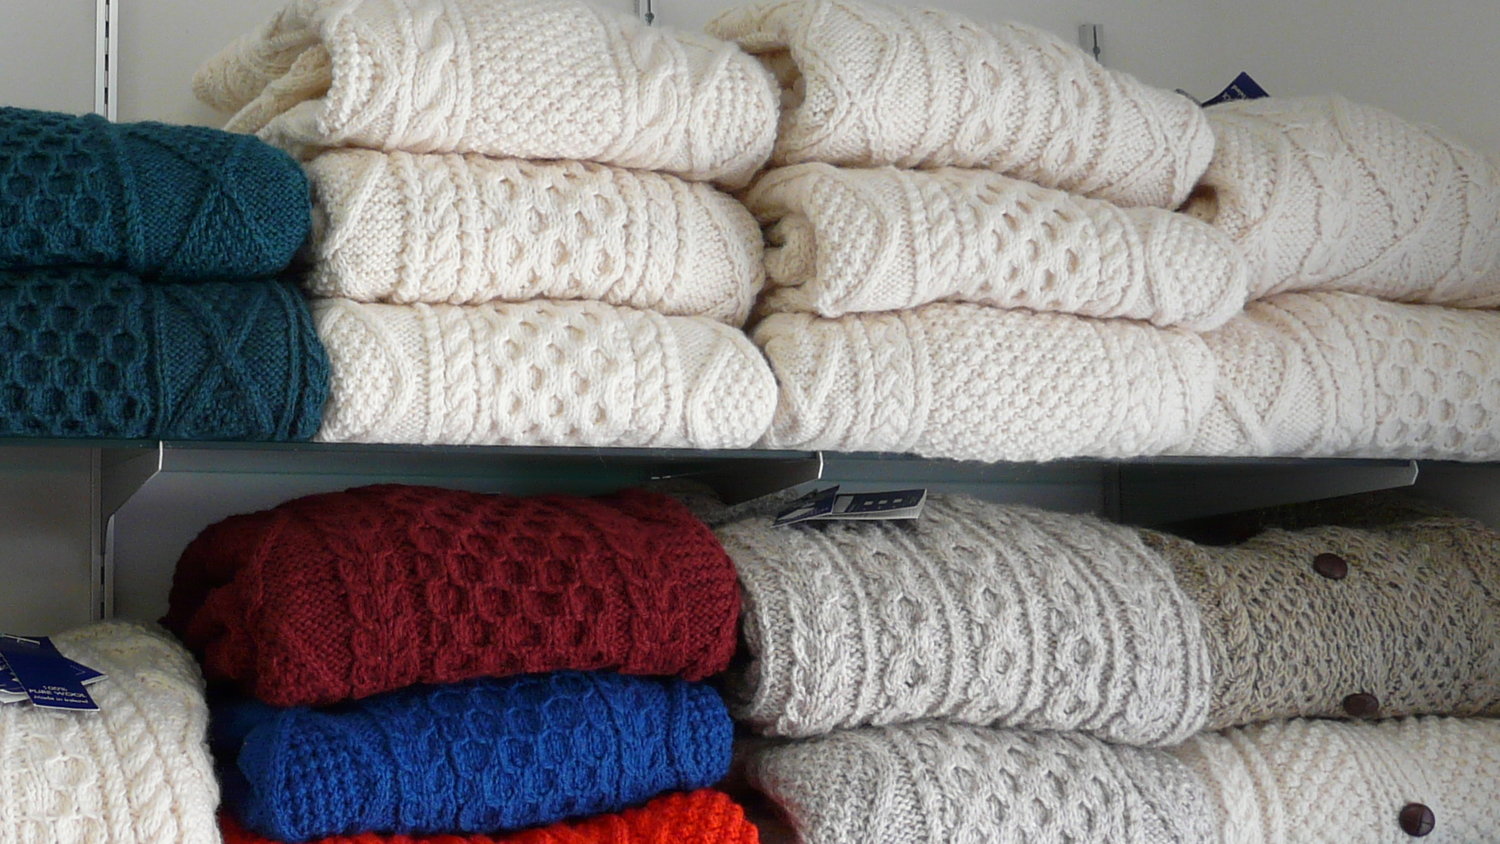 Some of the selection of sweaters at Little Shop of Shamrocks in Bay Shore.